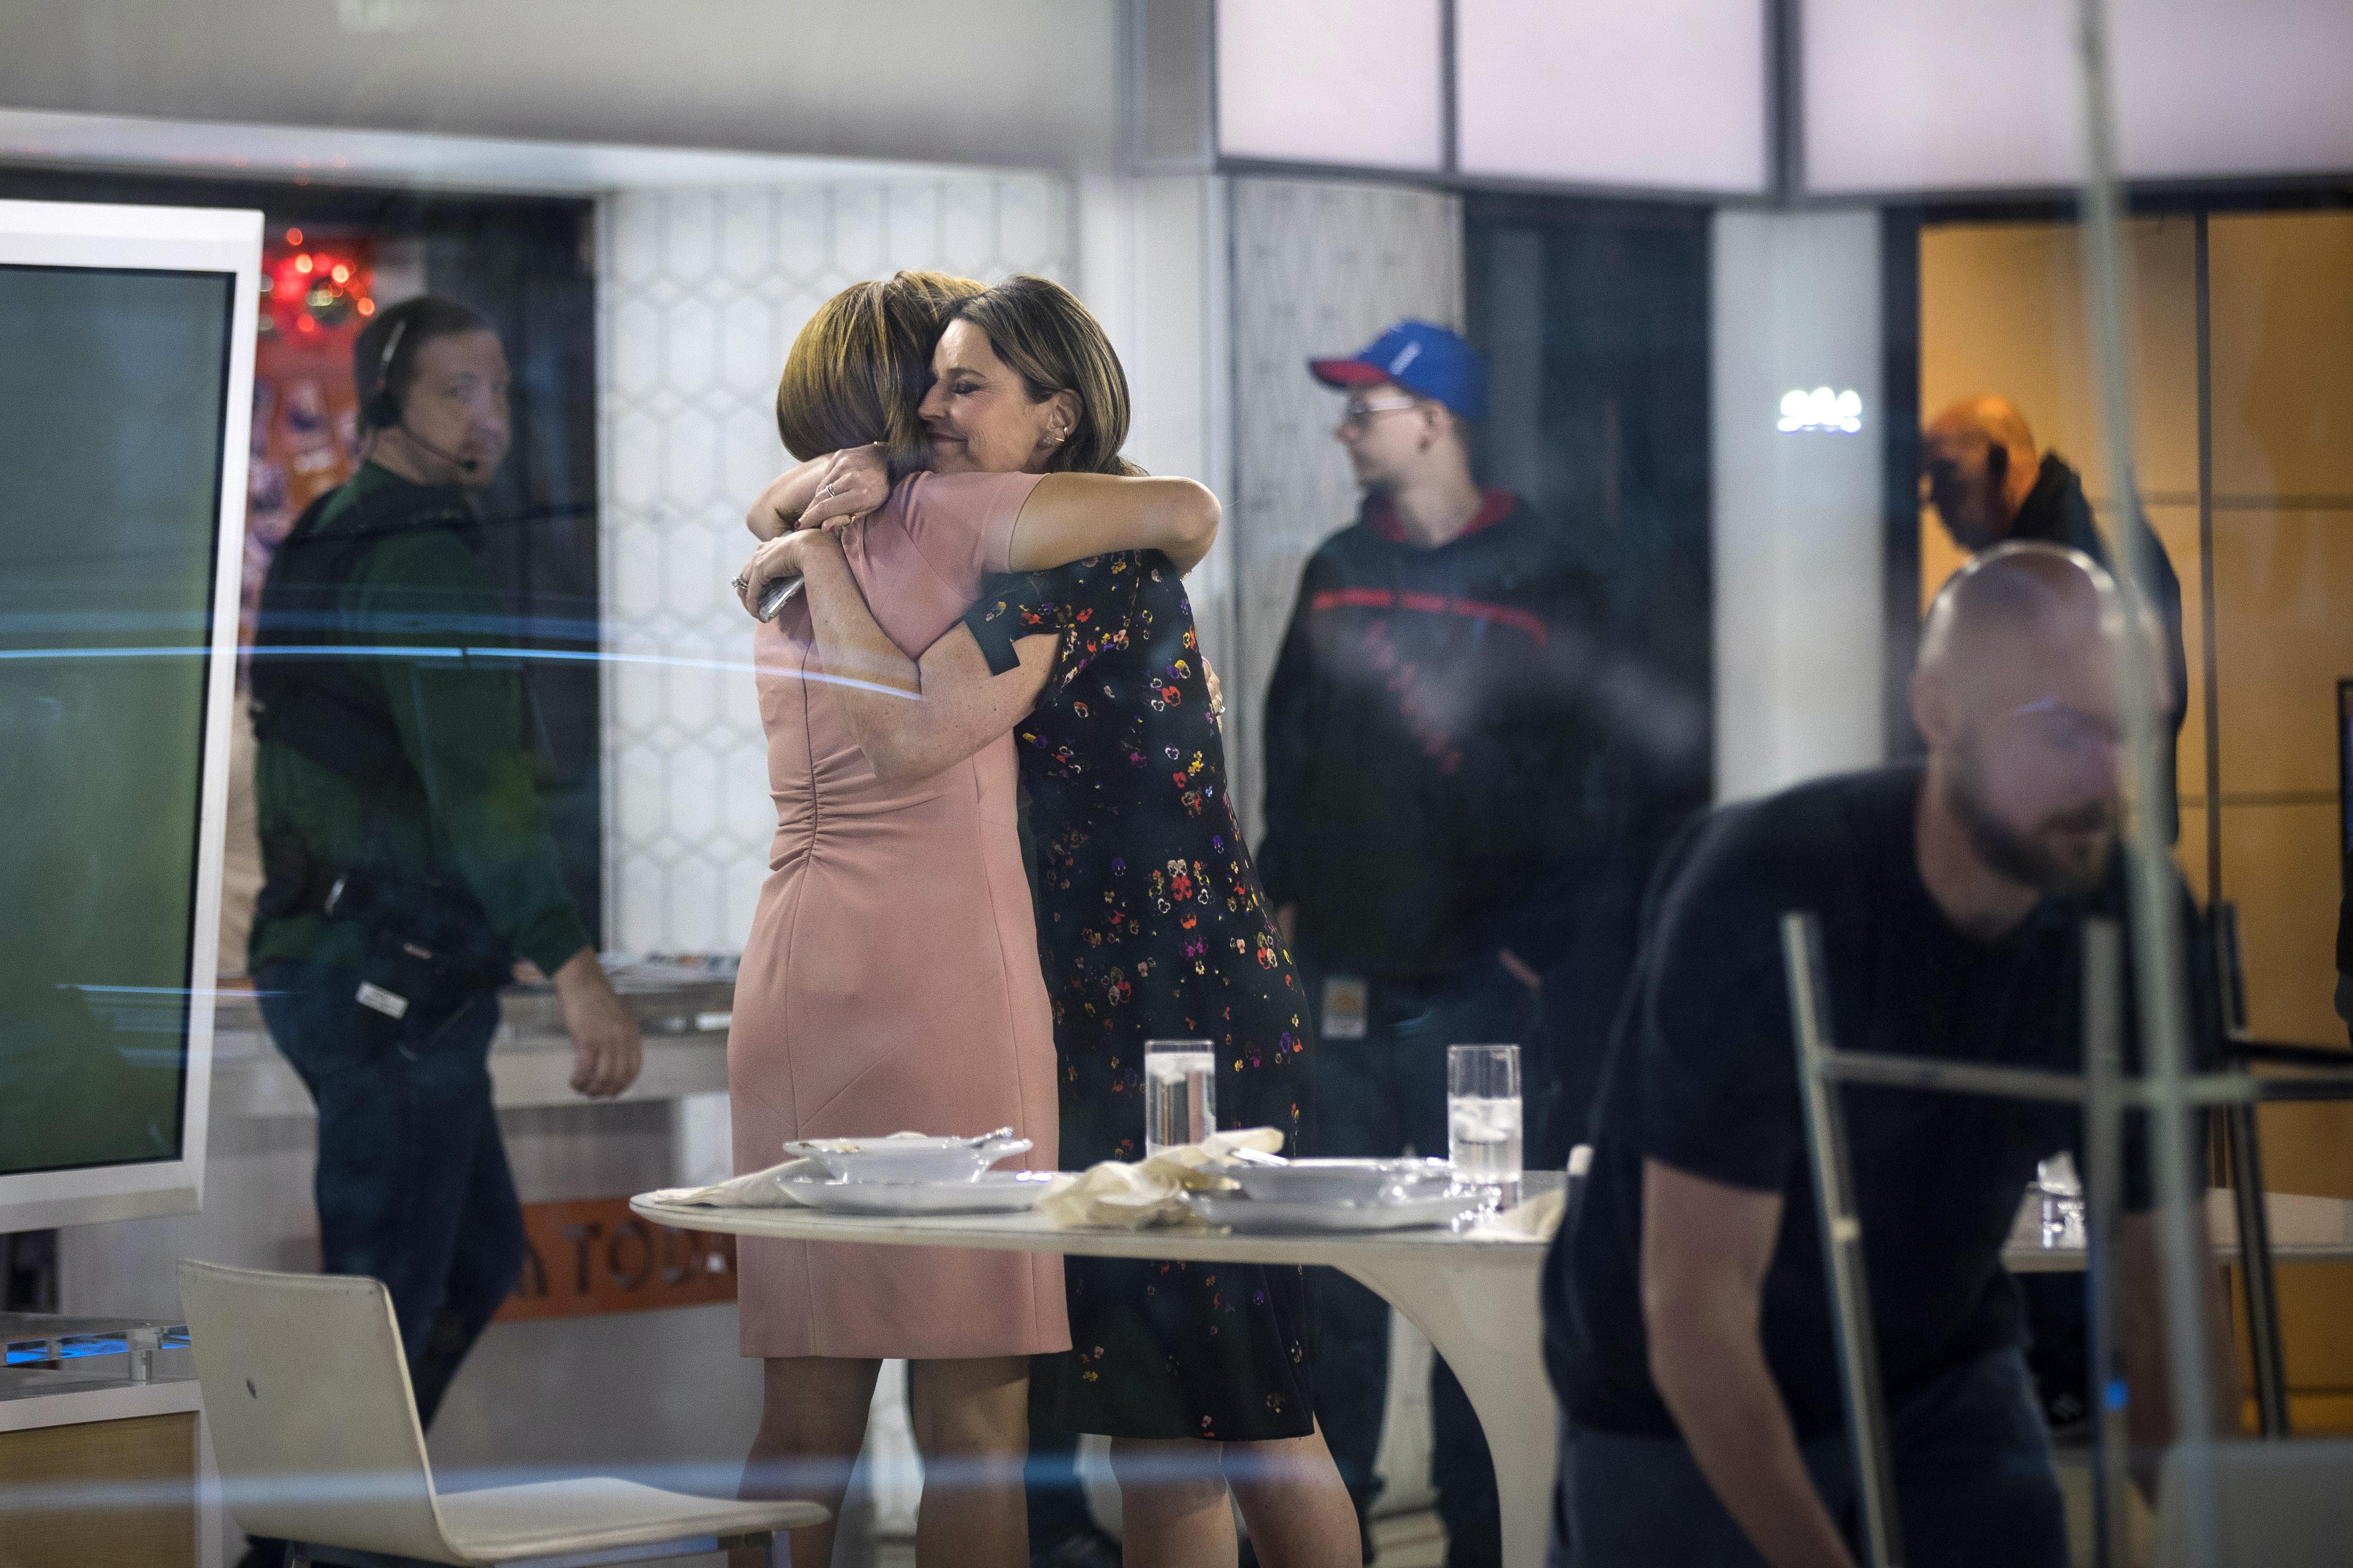 NEW YORK, NY - NOVEMBER 29: (L to R) Hoda Kotb and Savannah Guthrie embrace at the end of the show on the set of NBC's Today Show, November 29, 2017 in New York City. It was announced on Wednesday morning that long time Today Show host Matt Lauer had been fired for sexual misconduct. (Photo by Drew Angerer/Getty Images)